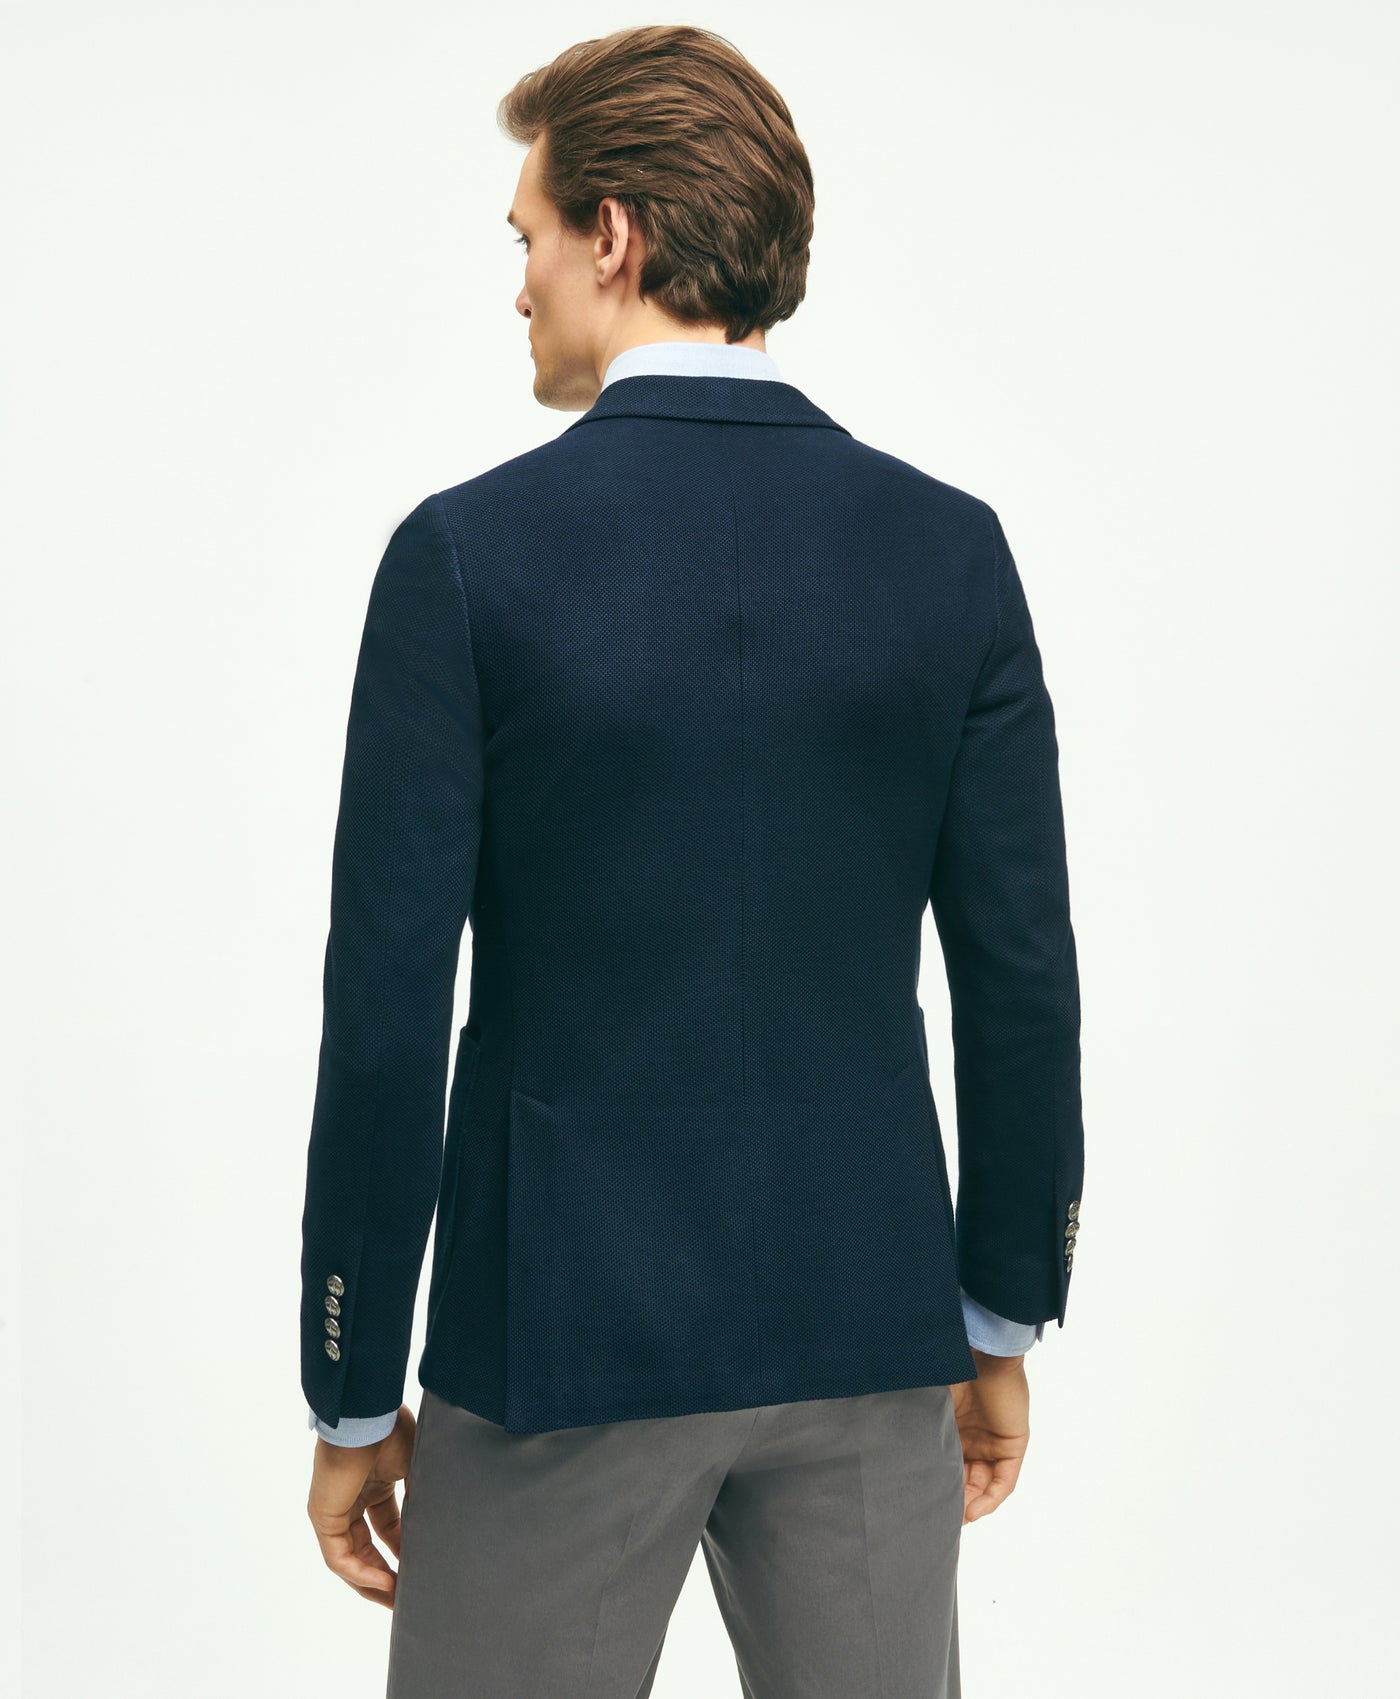 Classic Fit Cotton Pique Knit 1818 Blazer - Brooks Brothers Canada